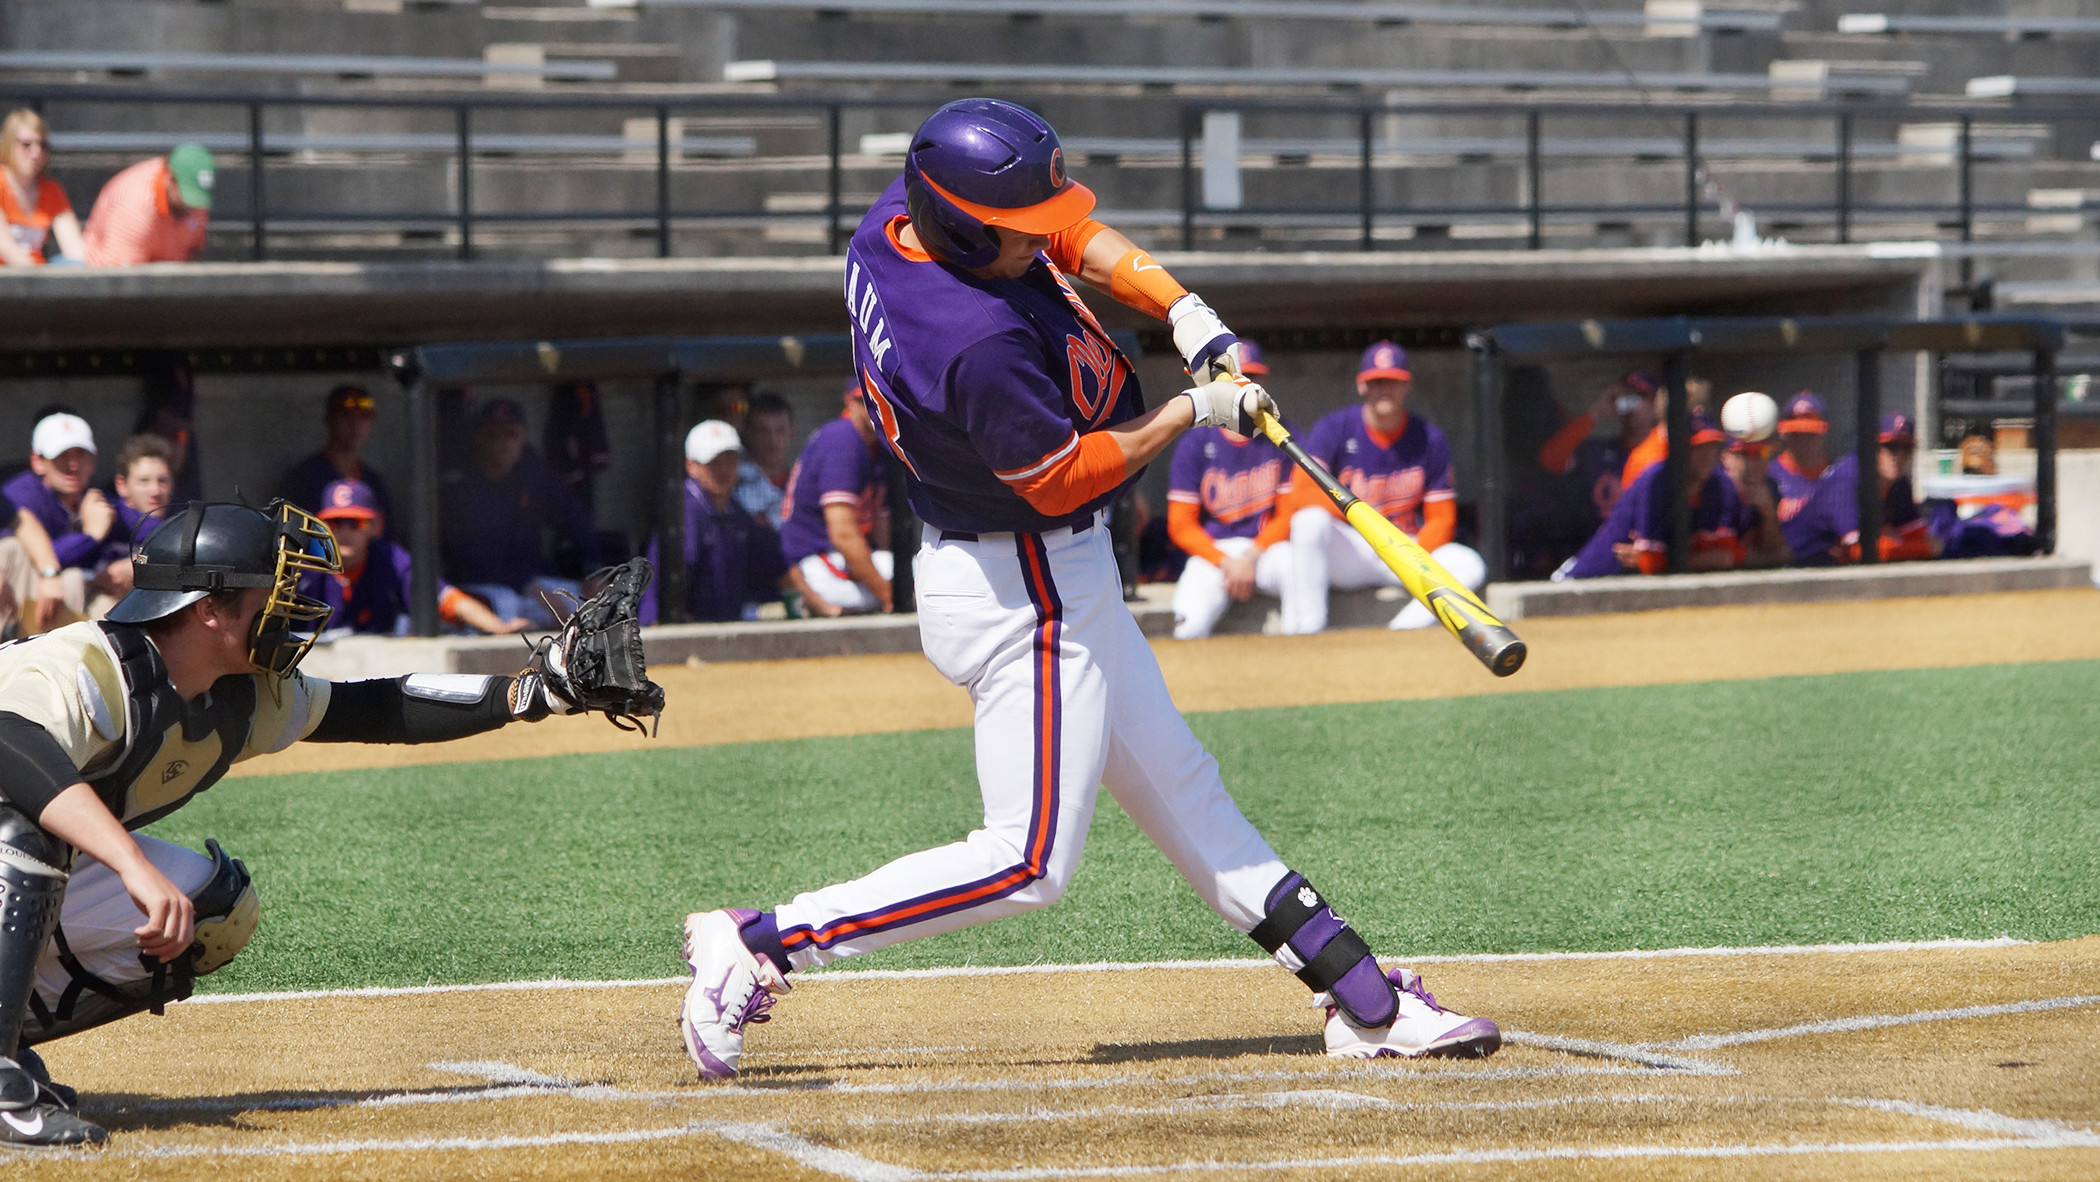 No. 14 Tigers Down Wake Forest 16-6 Saturday in First Game of DH